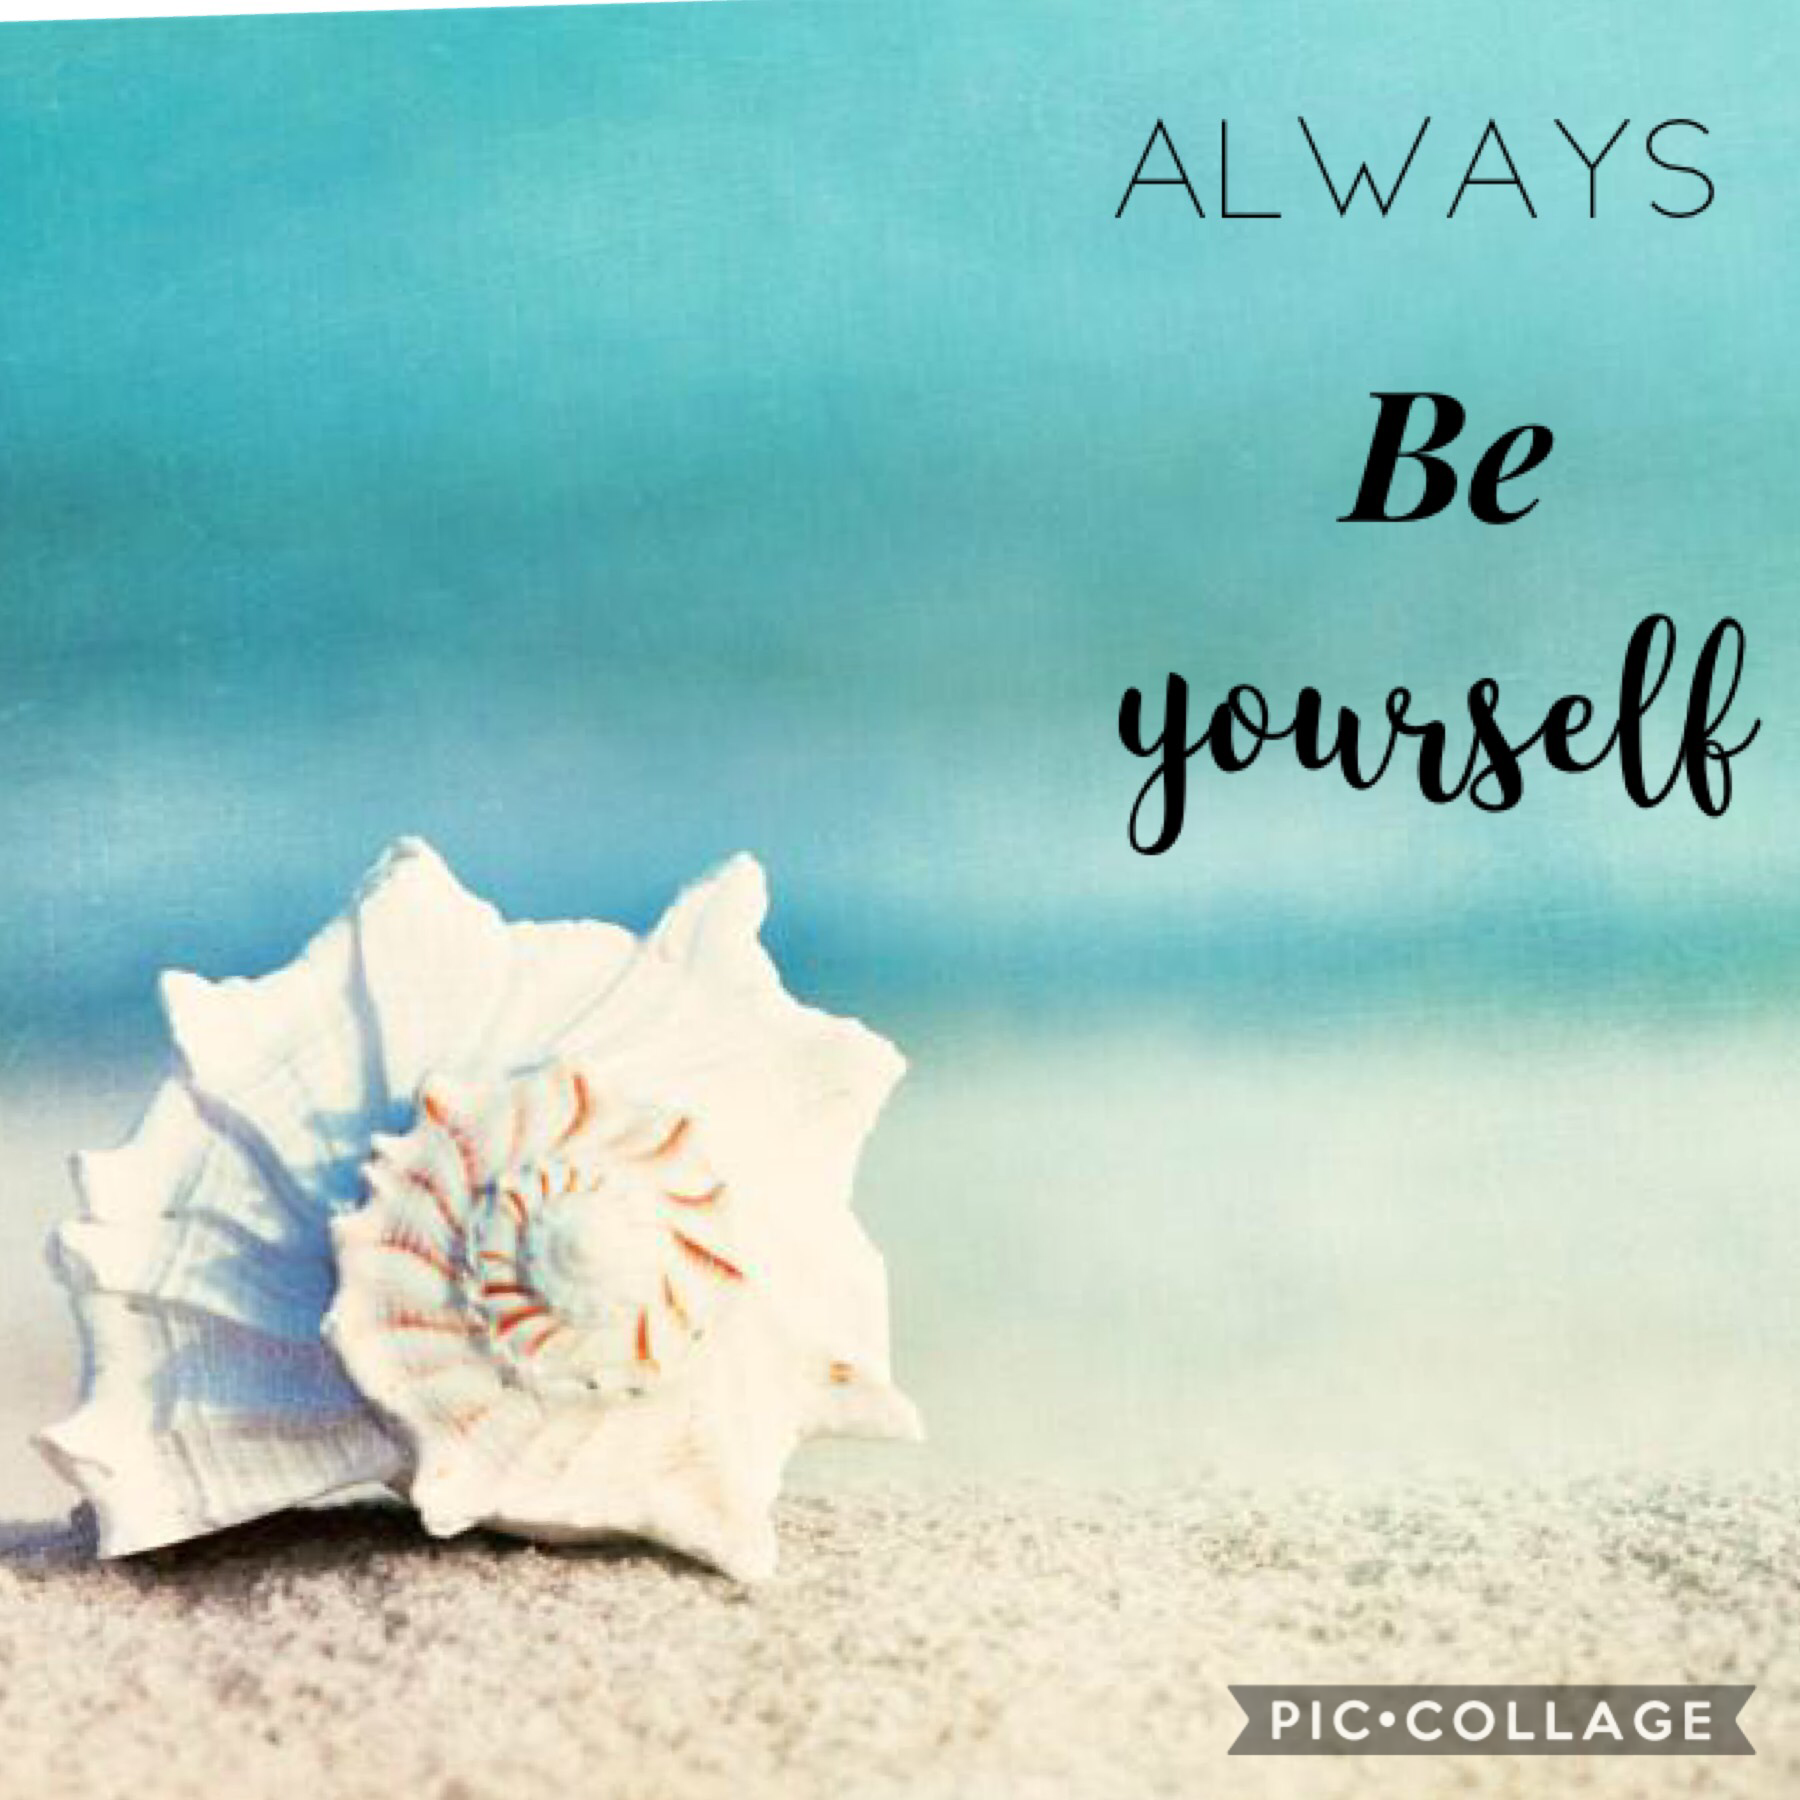 🌻Always be yourself🌻